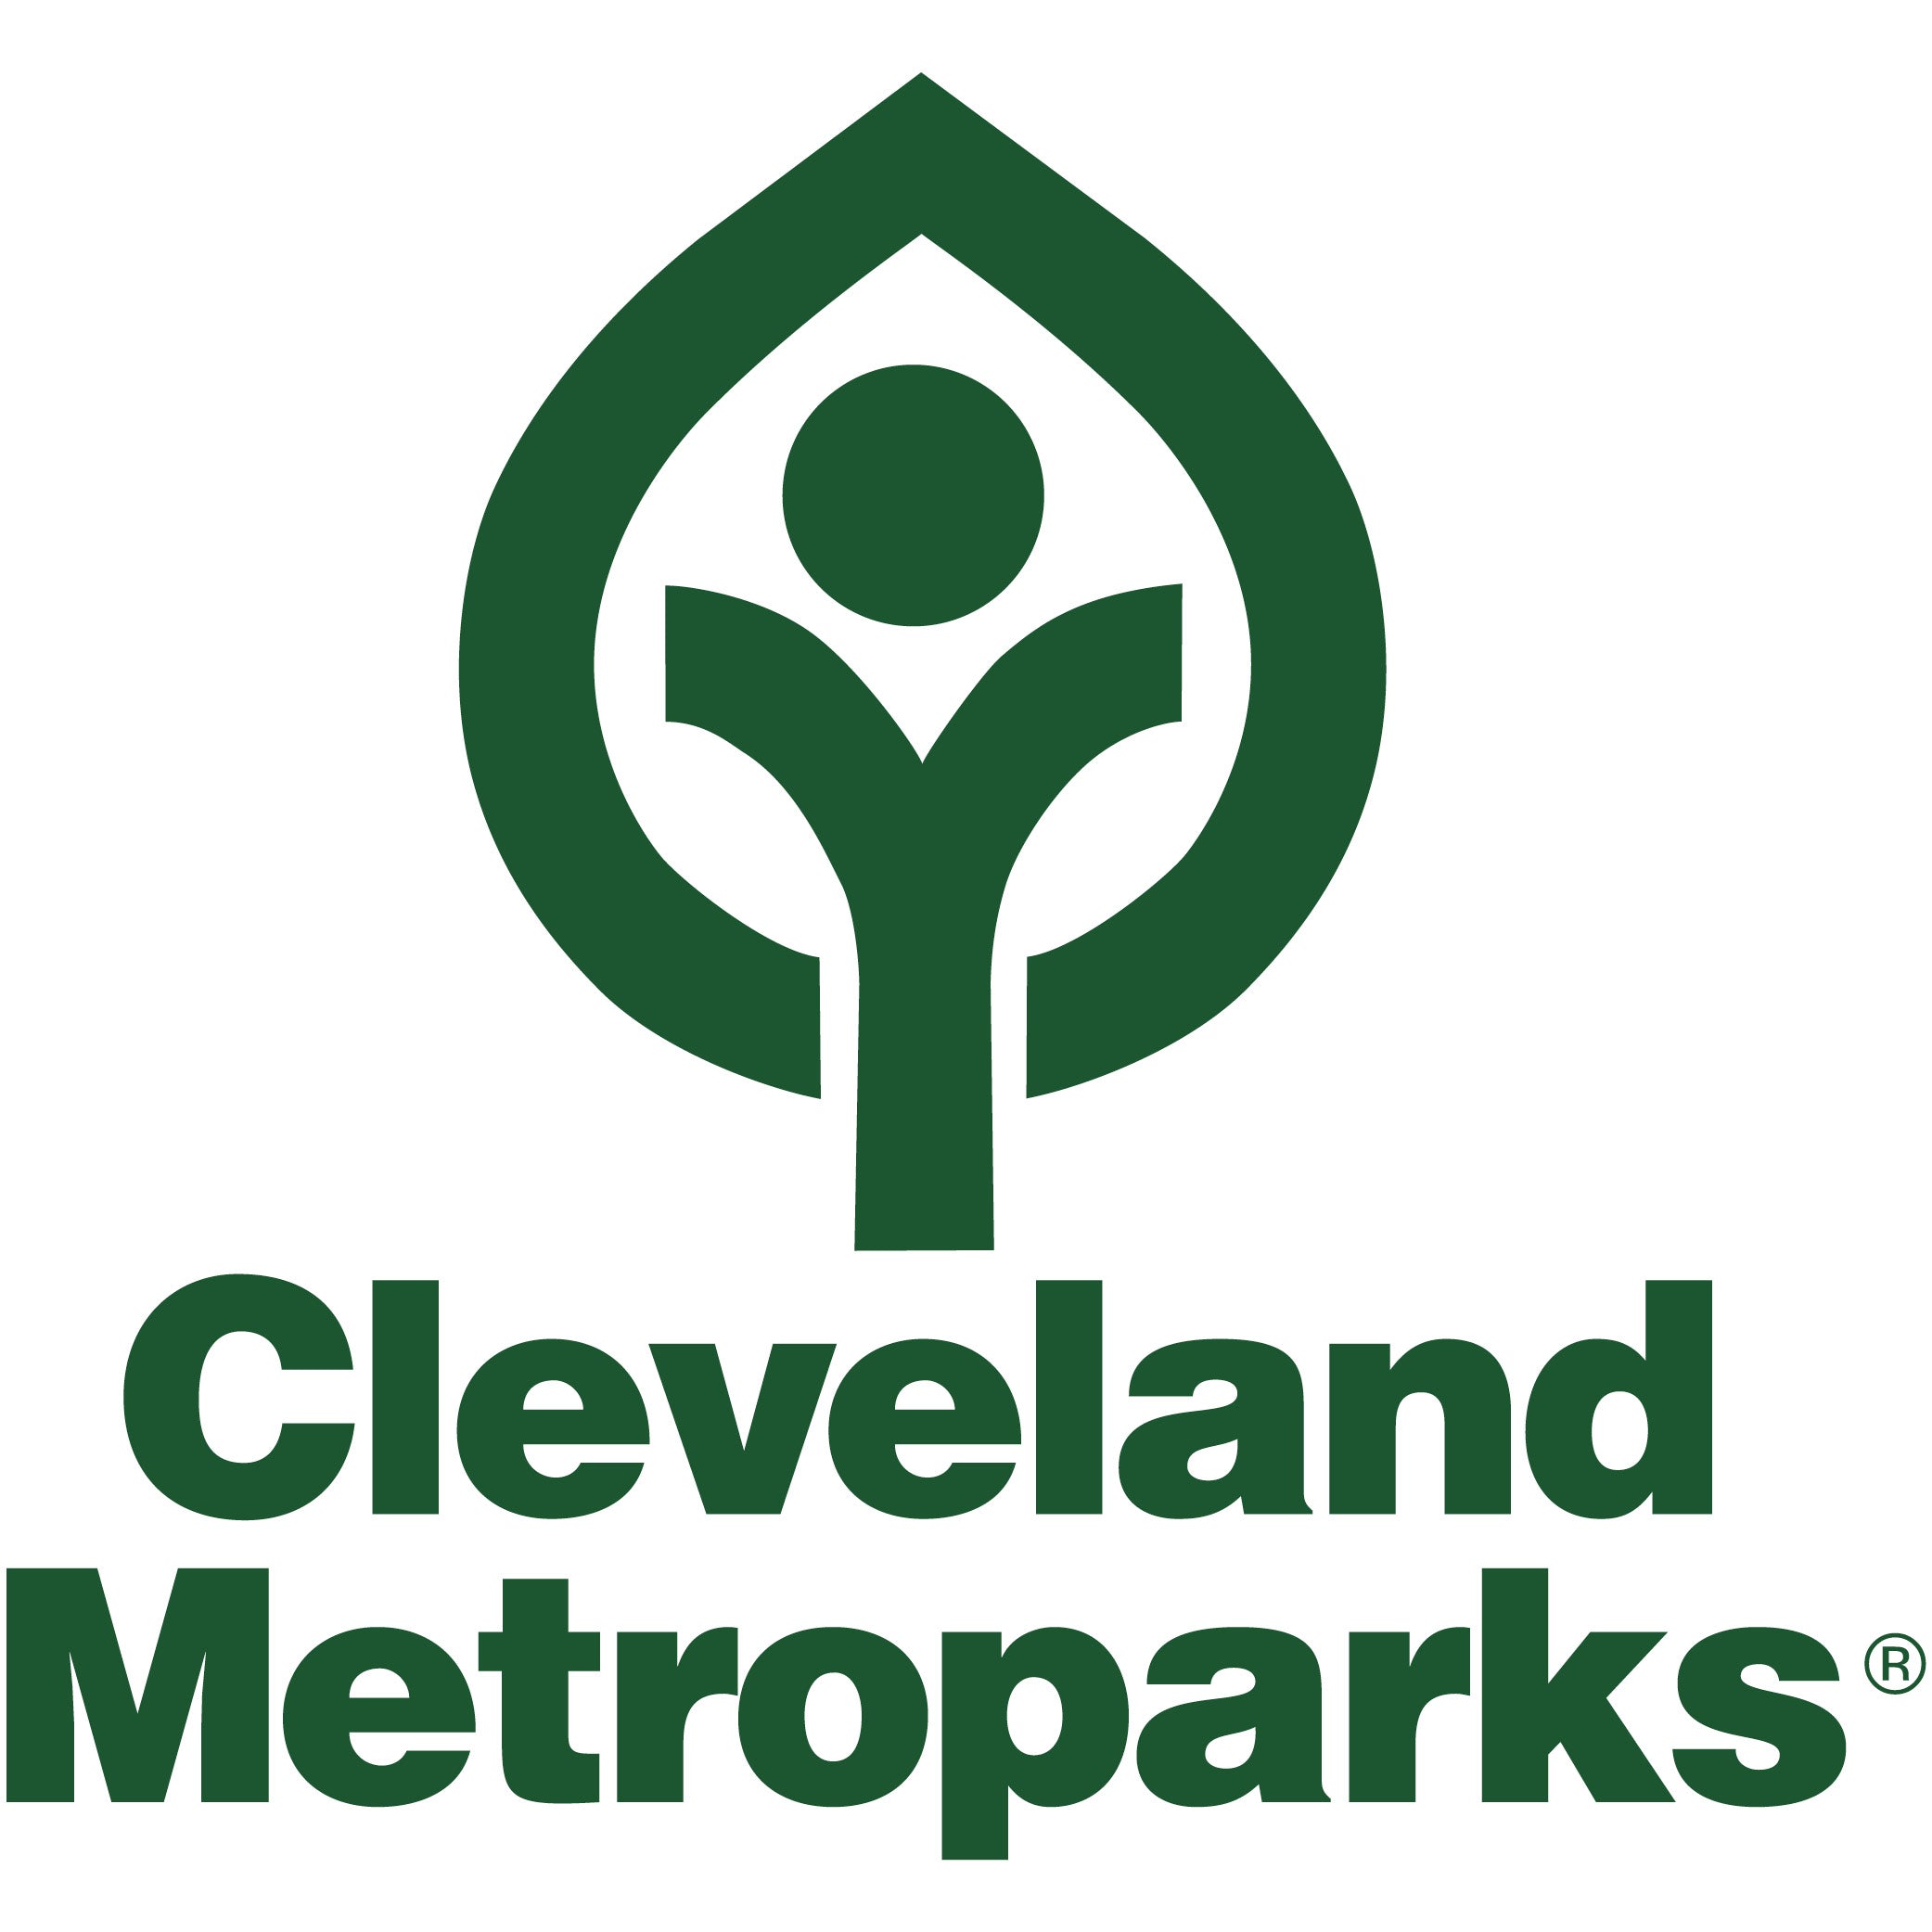 Cleveland Metroparks: Hiking Guide - Nicole Kathryn Creative